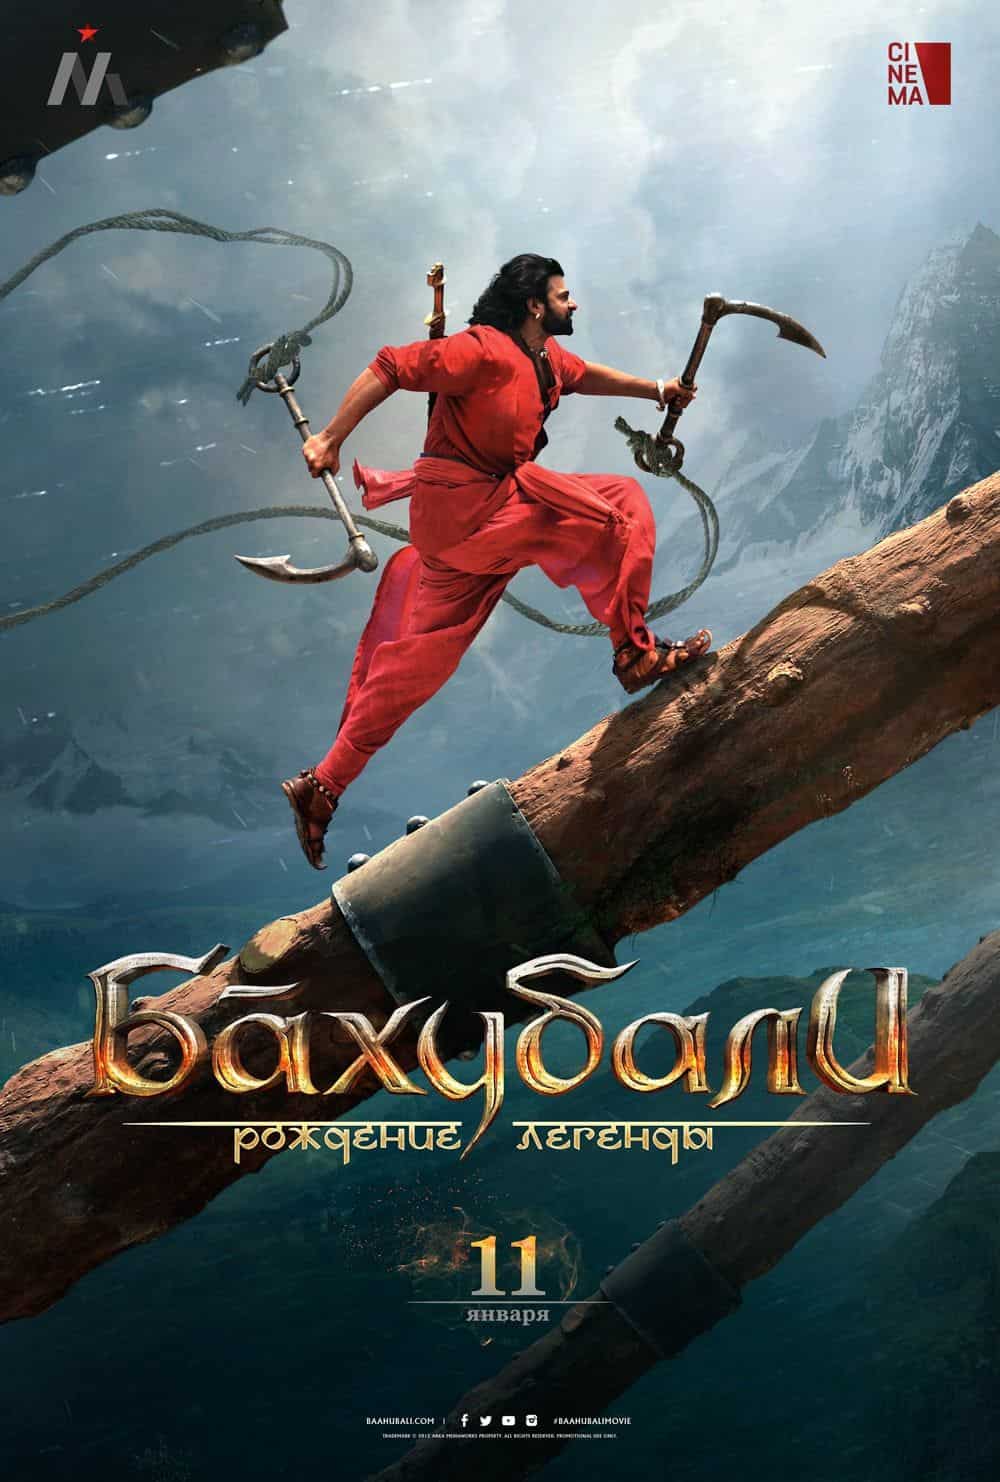 Baahubali: An audiobook based on the film, Baahubali The Lost Legends,  about hidden stories of the Mahishmati kingdom launched